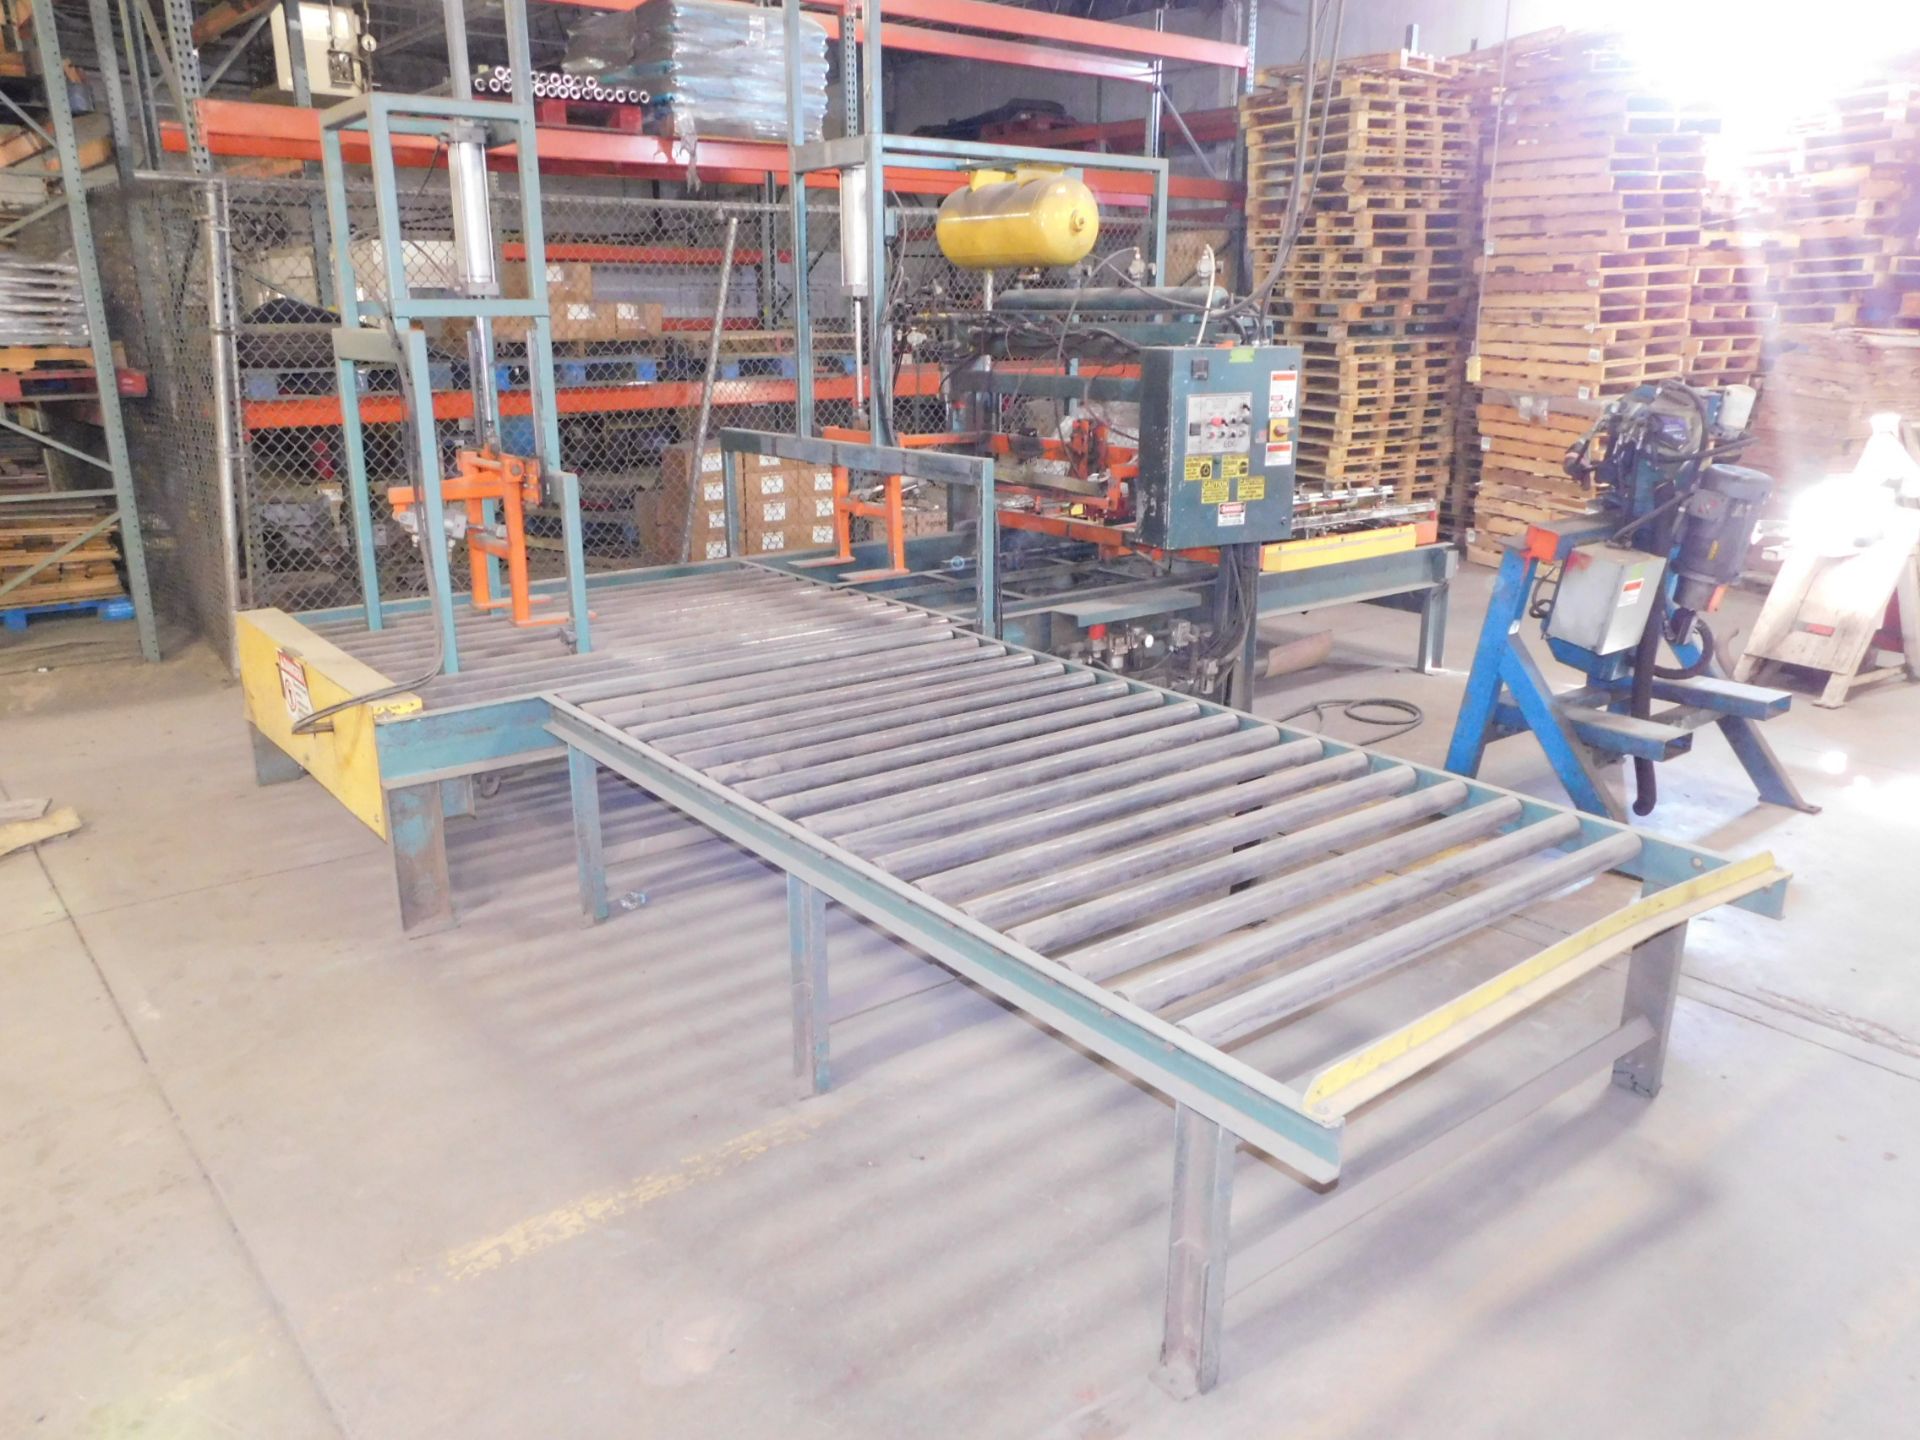 Rayco Edge Automatic Pallet Nailer, 64" x 10' Infeed Roller Conveyor, 6' x7' Stacking Area, Auto - Image 2 of 11